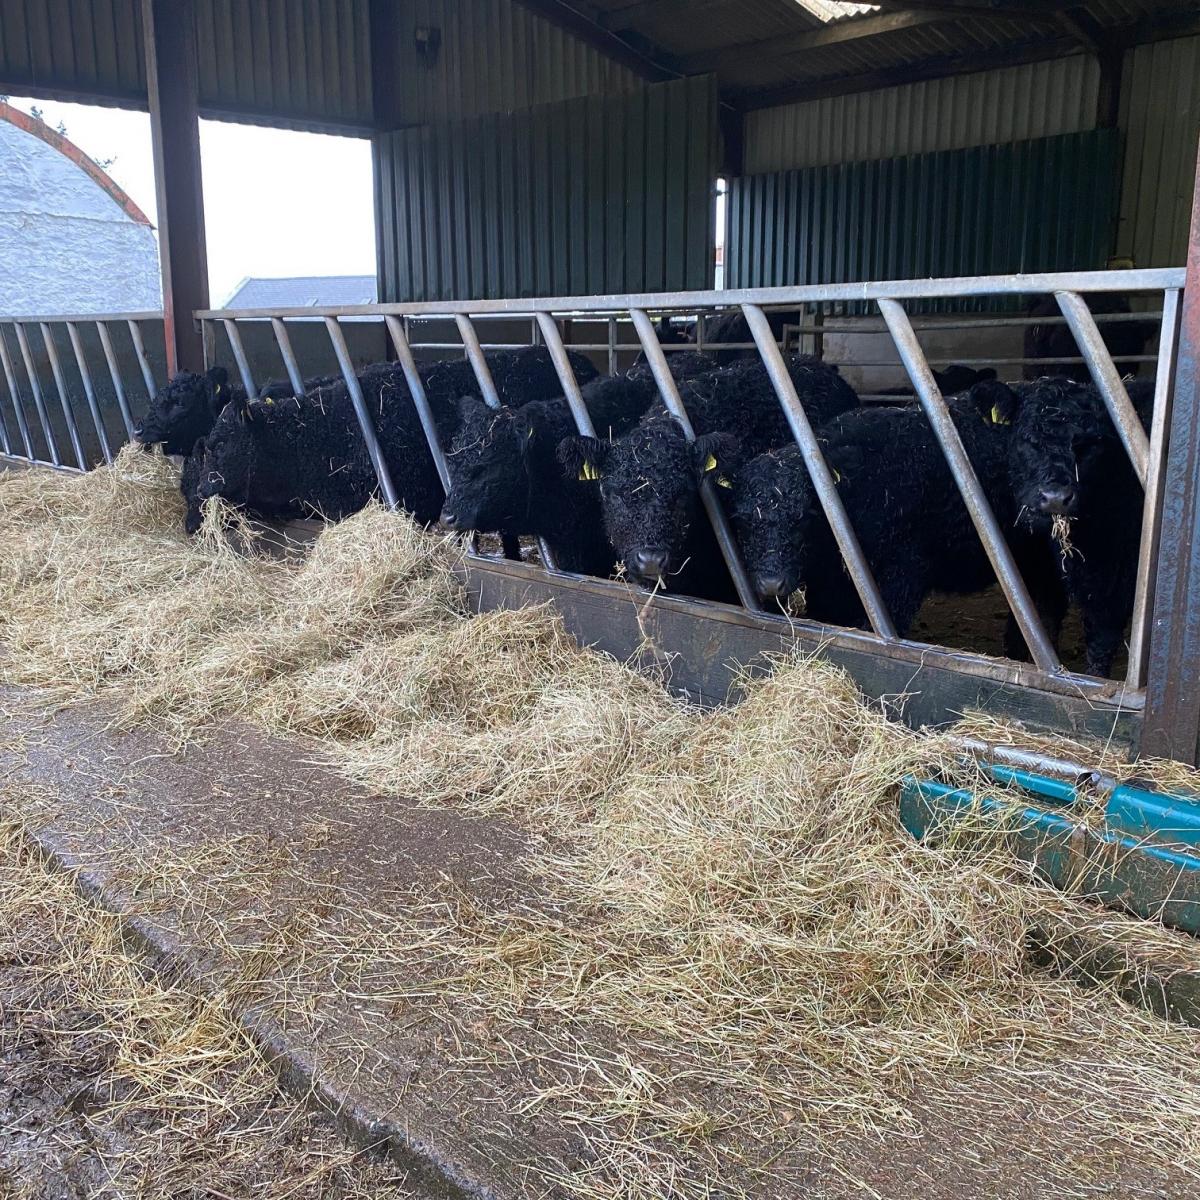 James Wallace - Feeding Time for Galloway Heifers